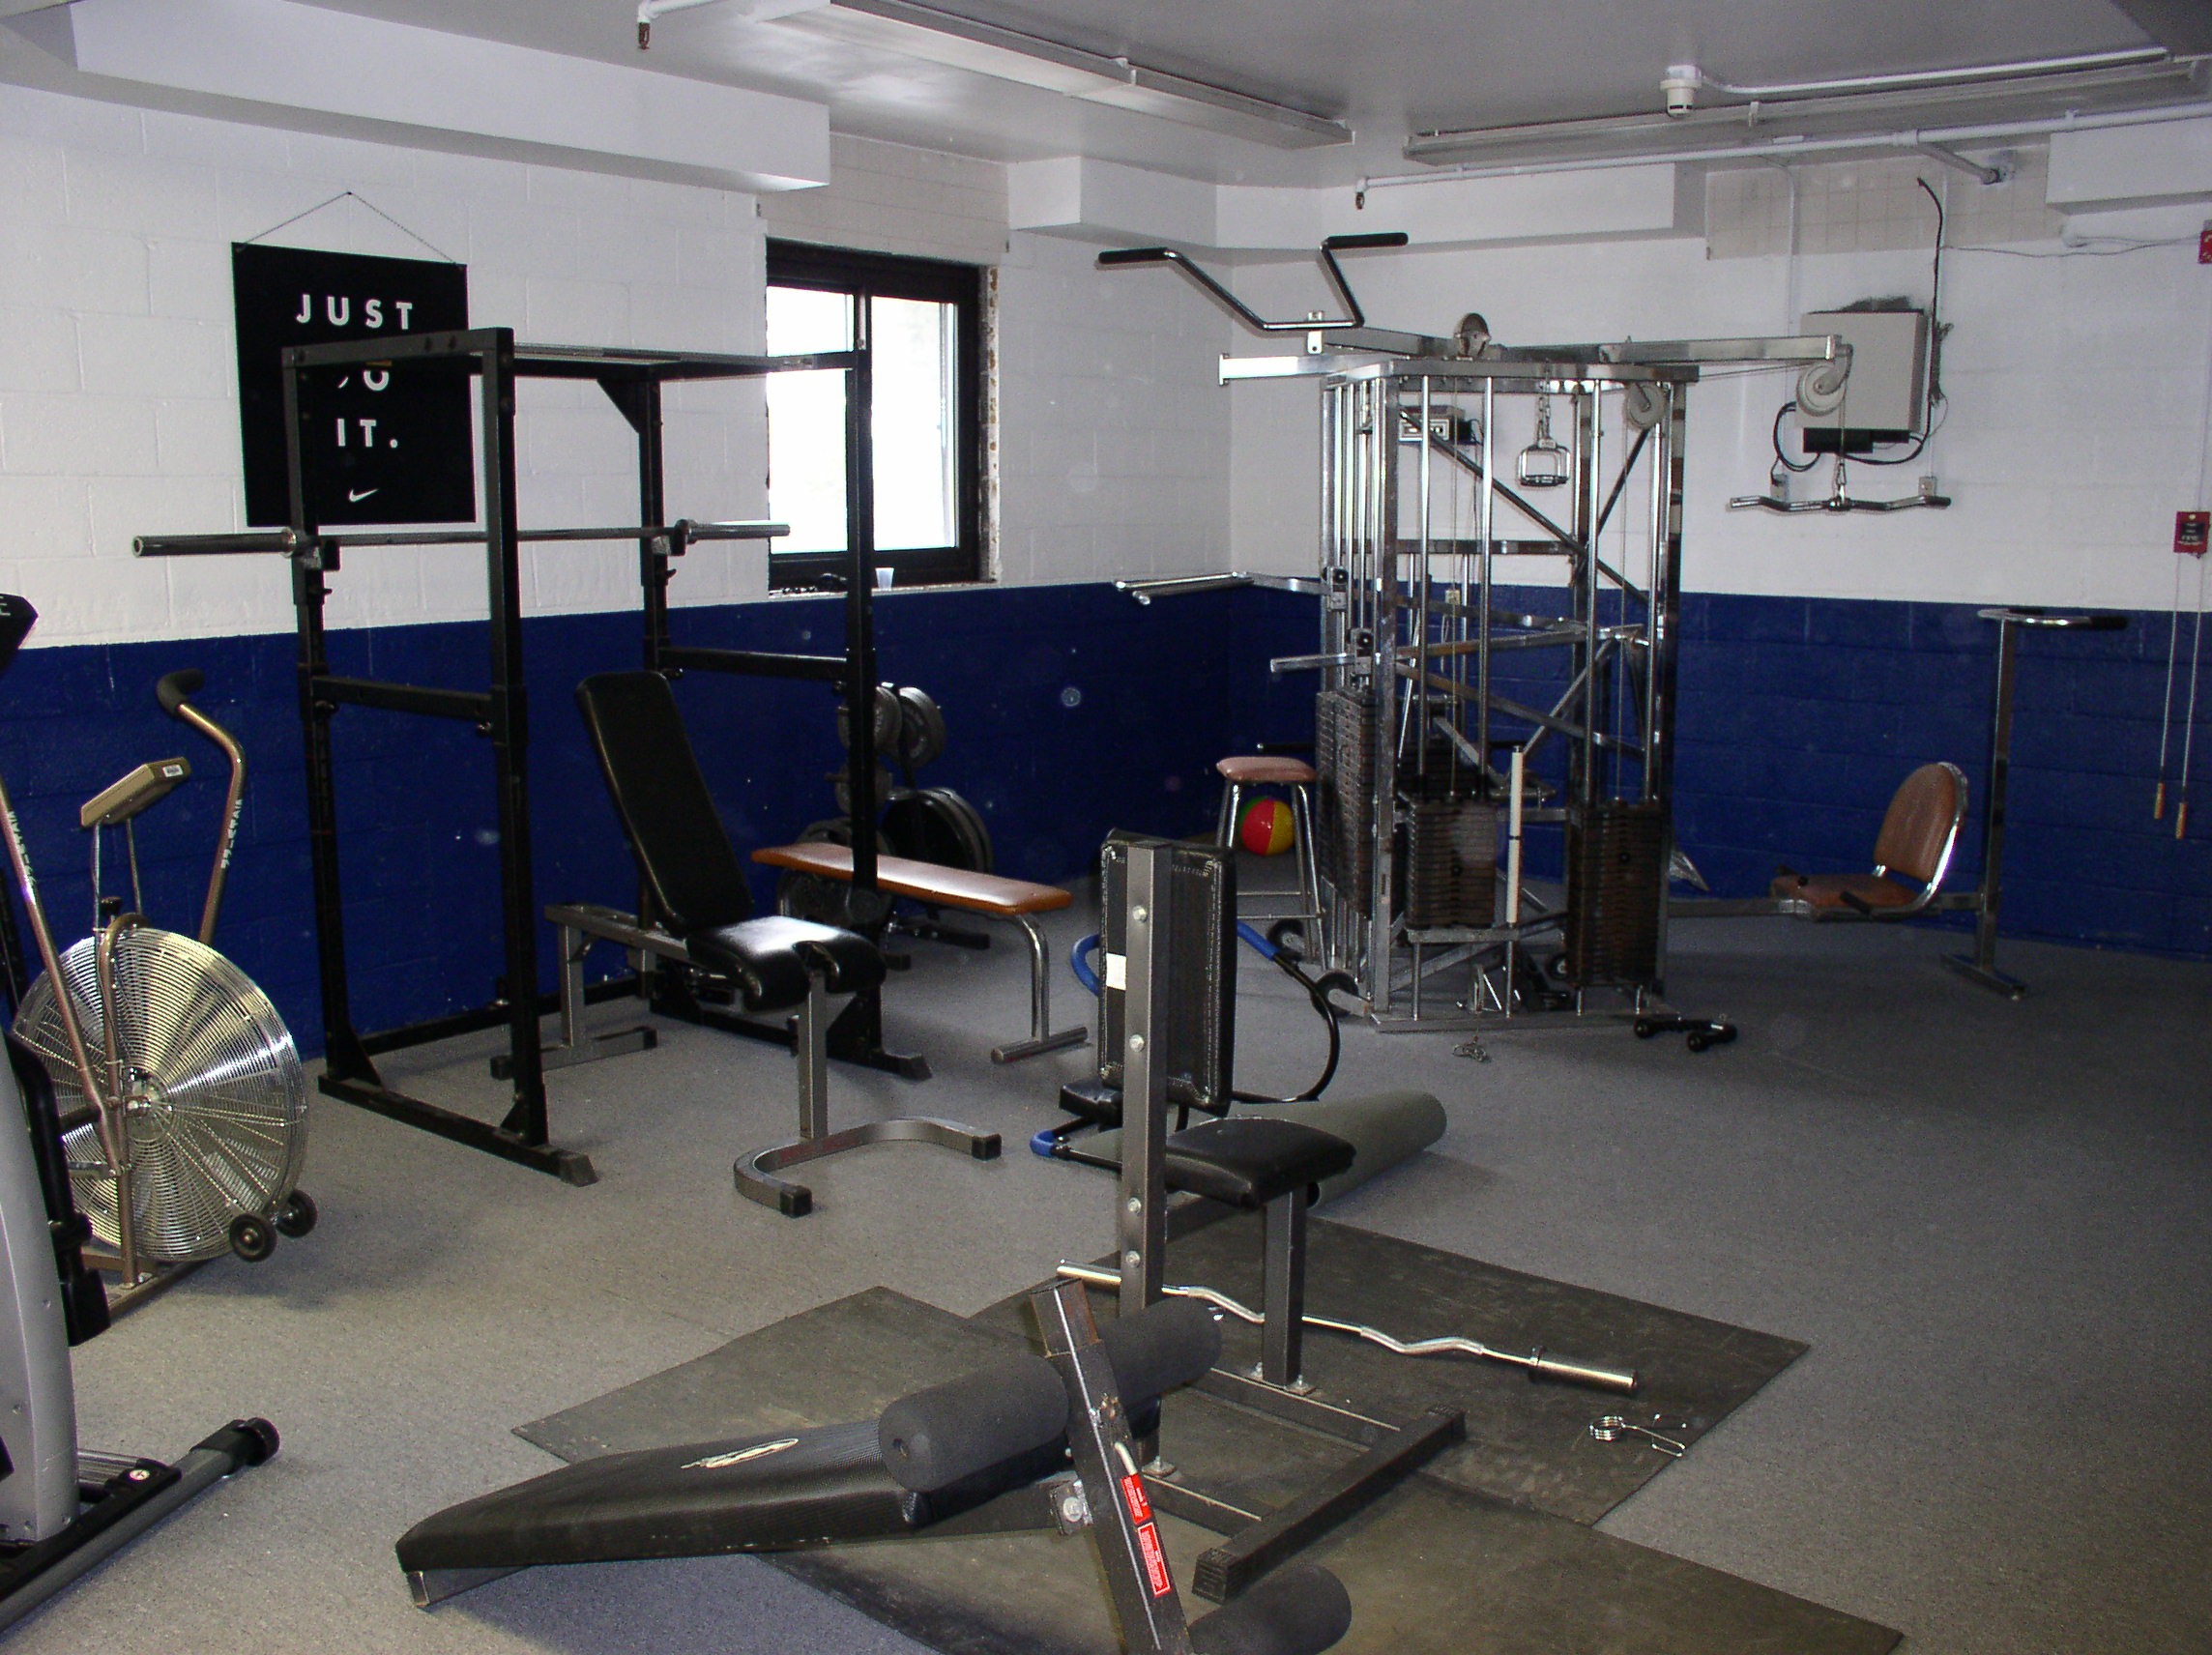 03-24-05  Other - Workout Room